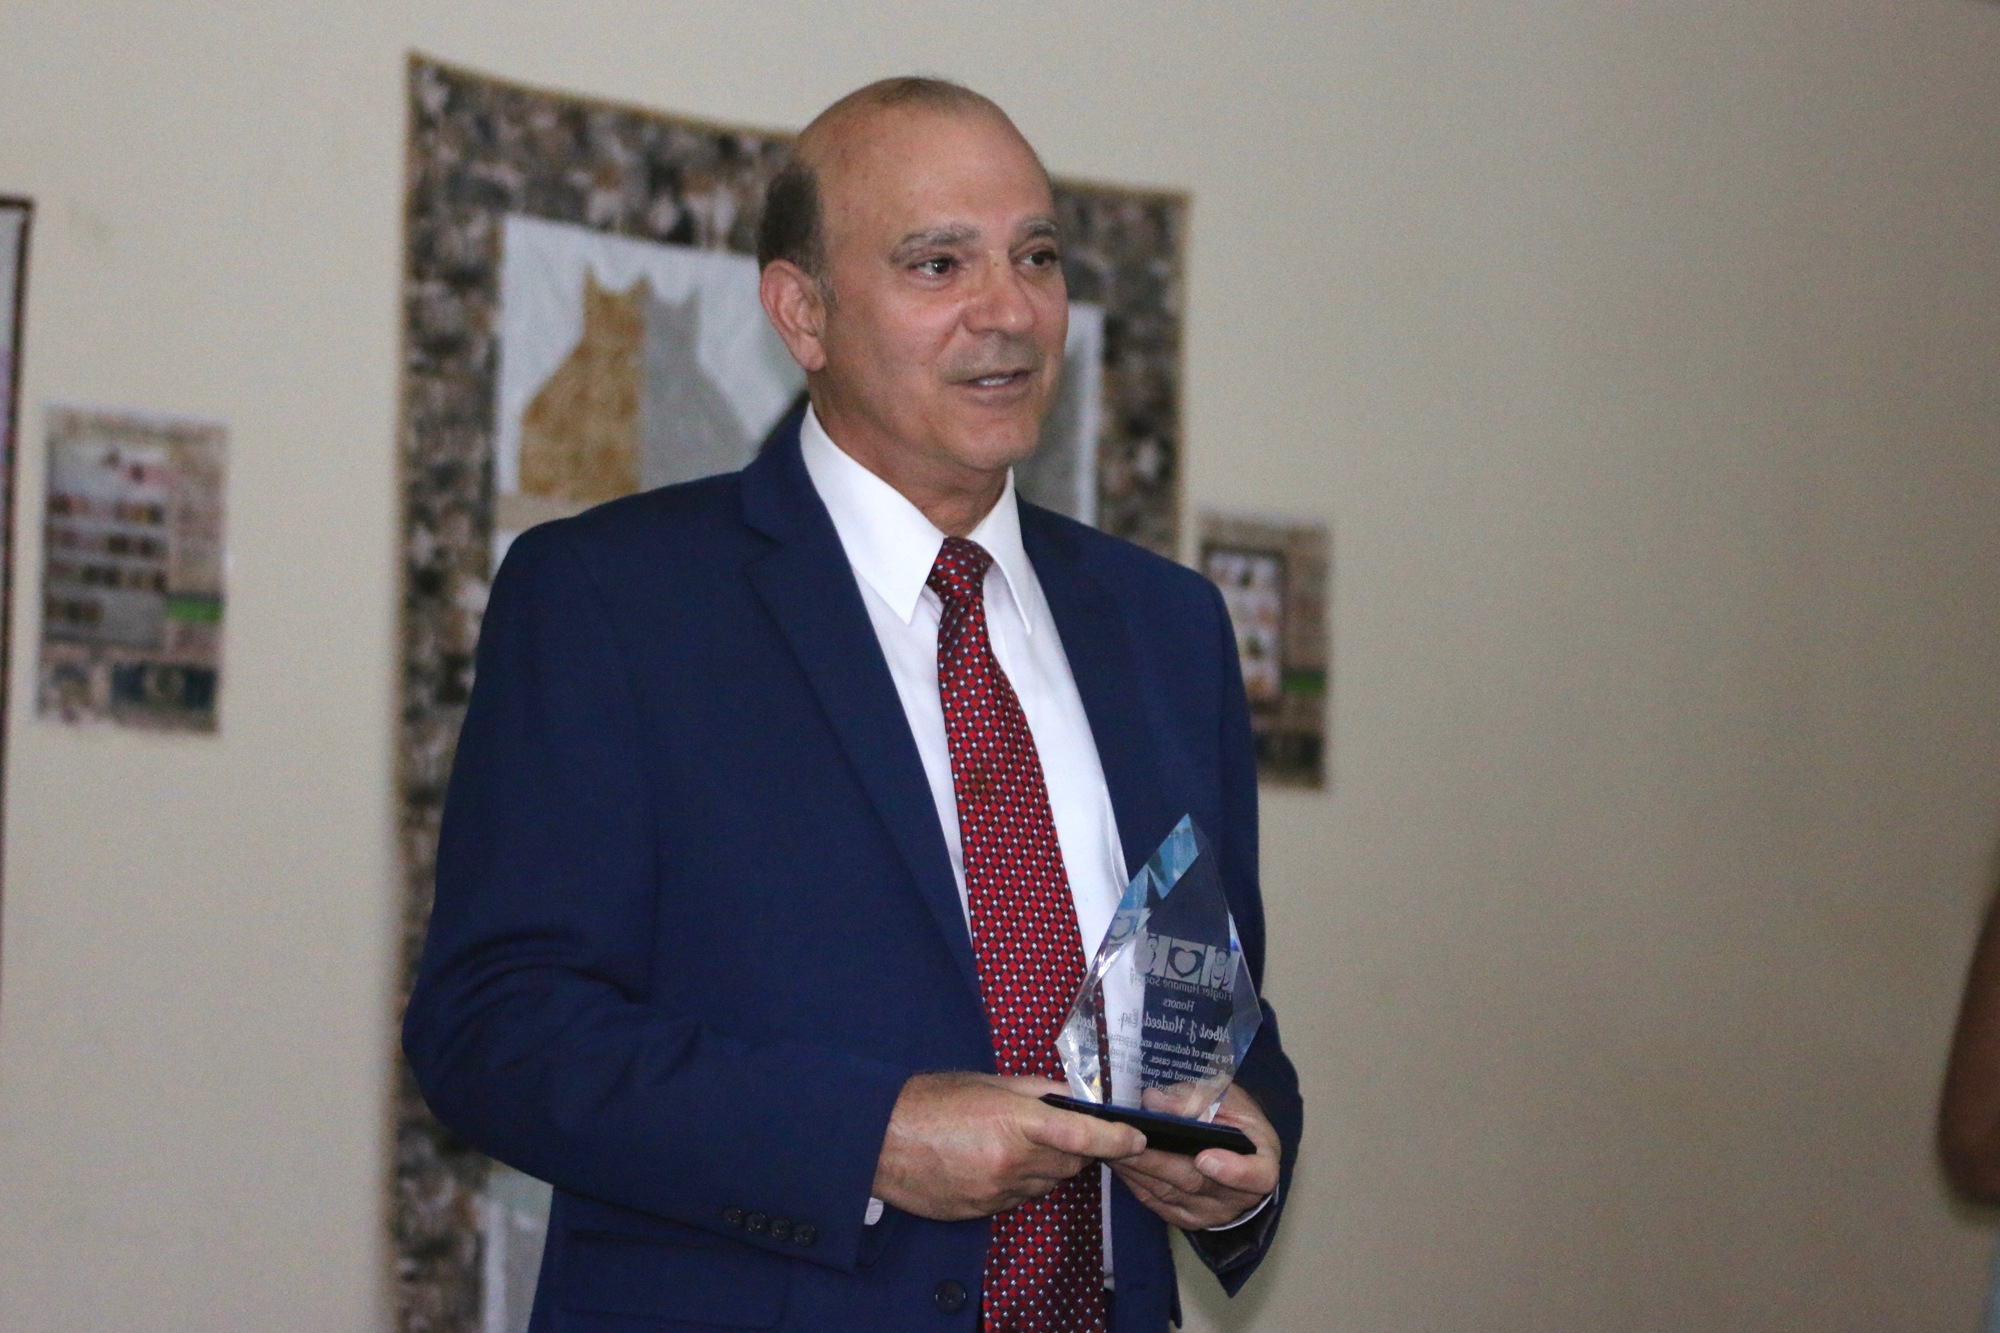 Flagler County Attorney Al Hadeed was recognized for his support of animal control's efforts to aid abused and neglected animals. (Photo by Jonathan Simmons)